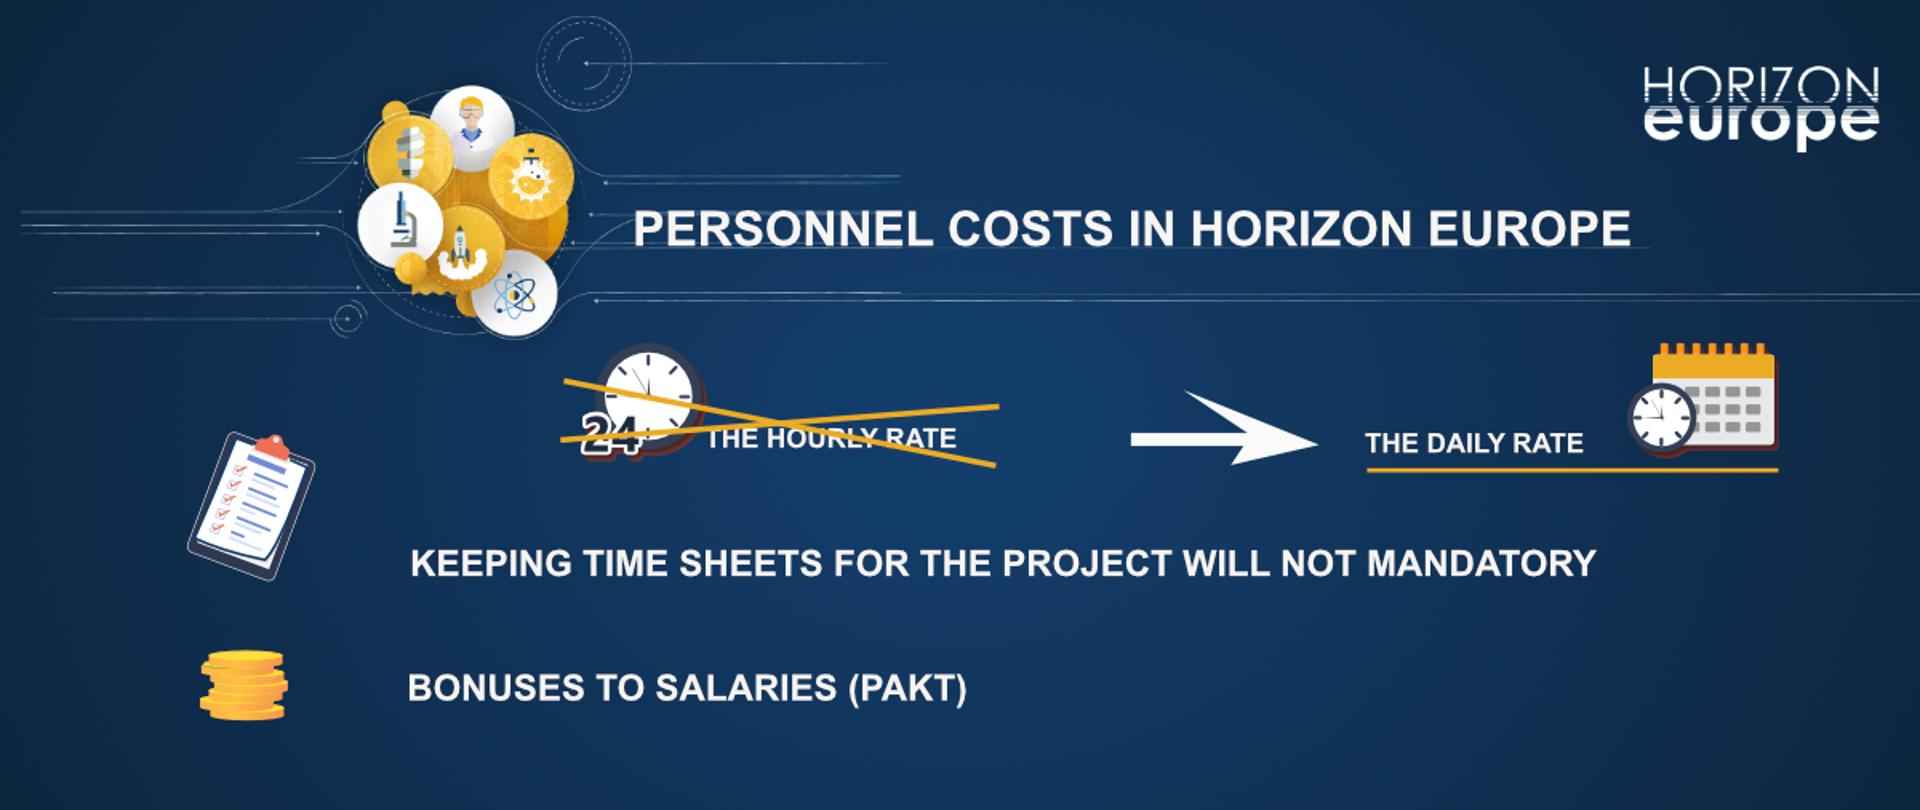 Personnel costs in Horizon Europe